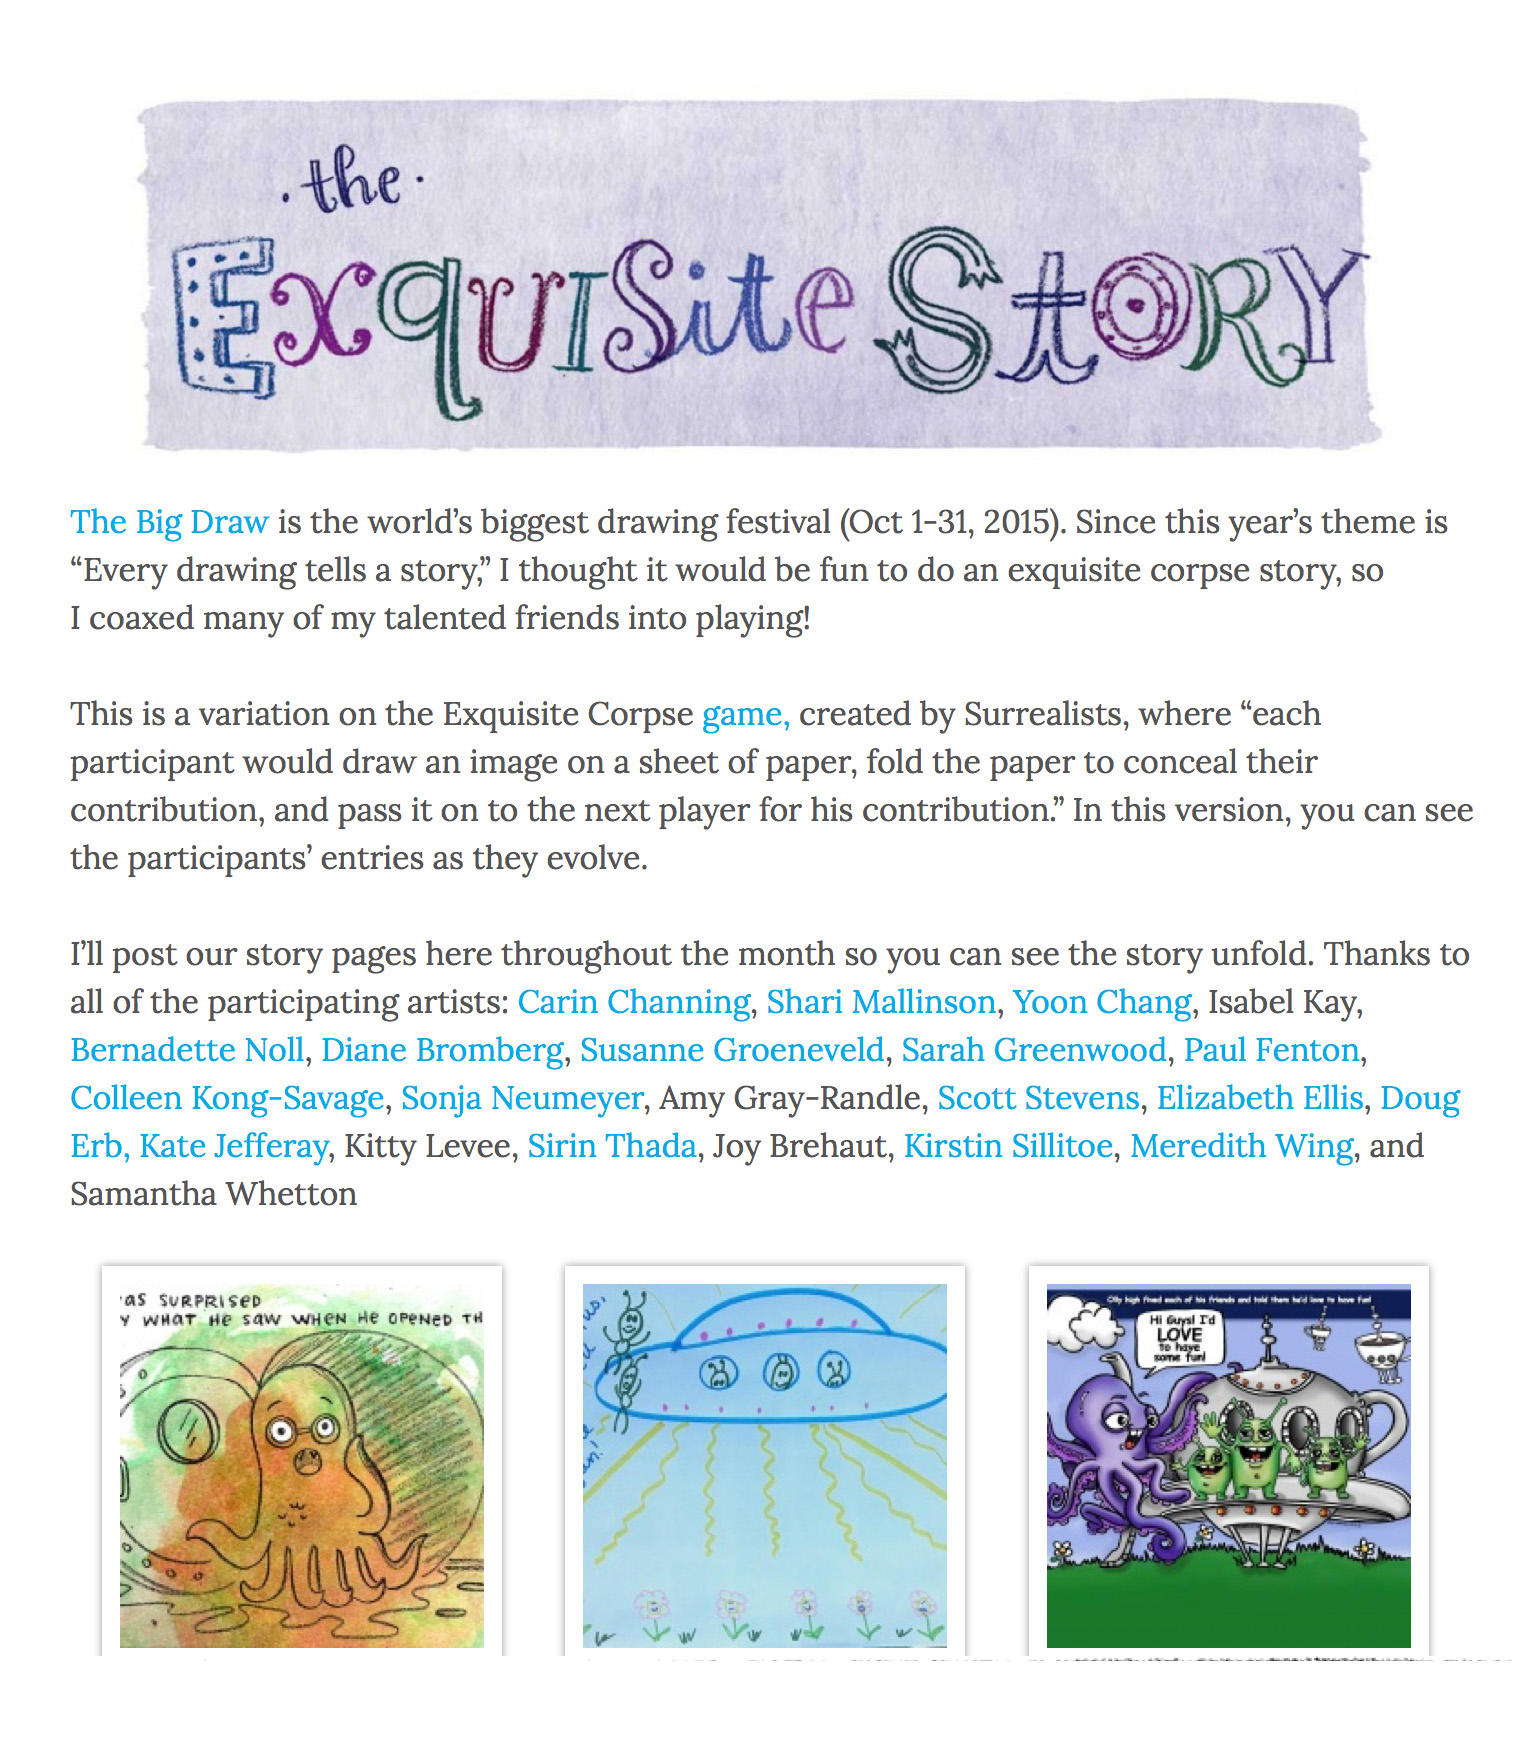 THE BIG DRAW, THE EXQUISITE STORY